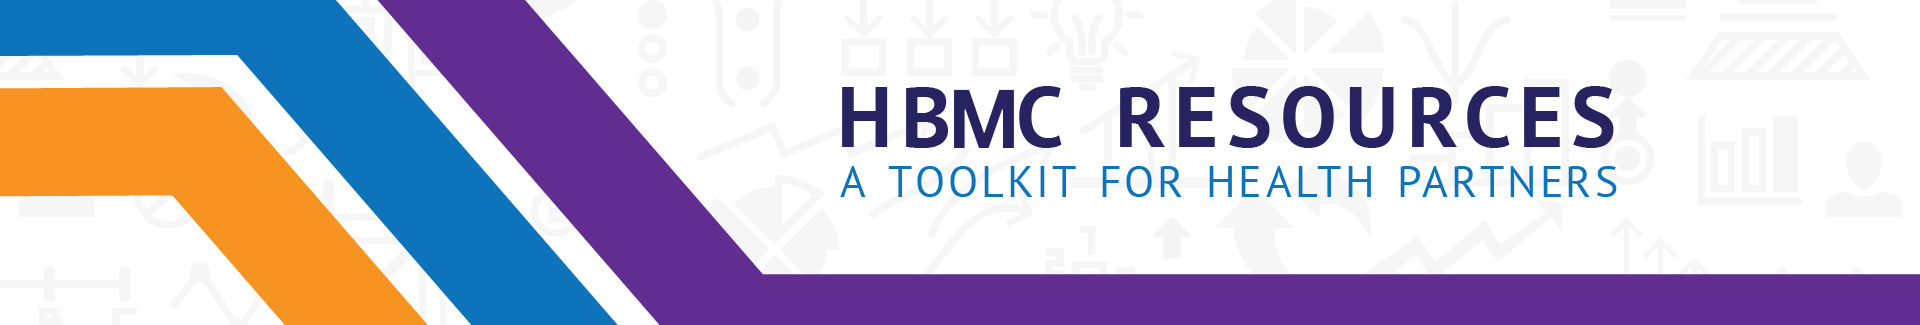 Home-based Medical Care Toolkit